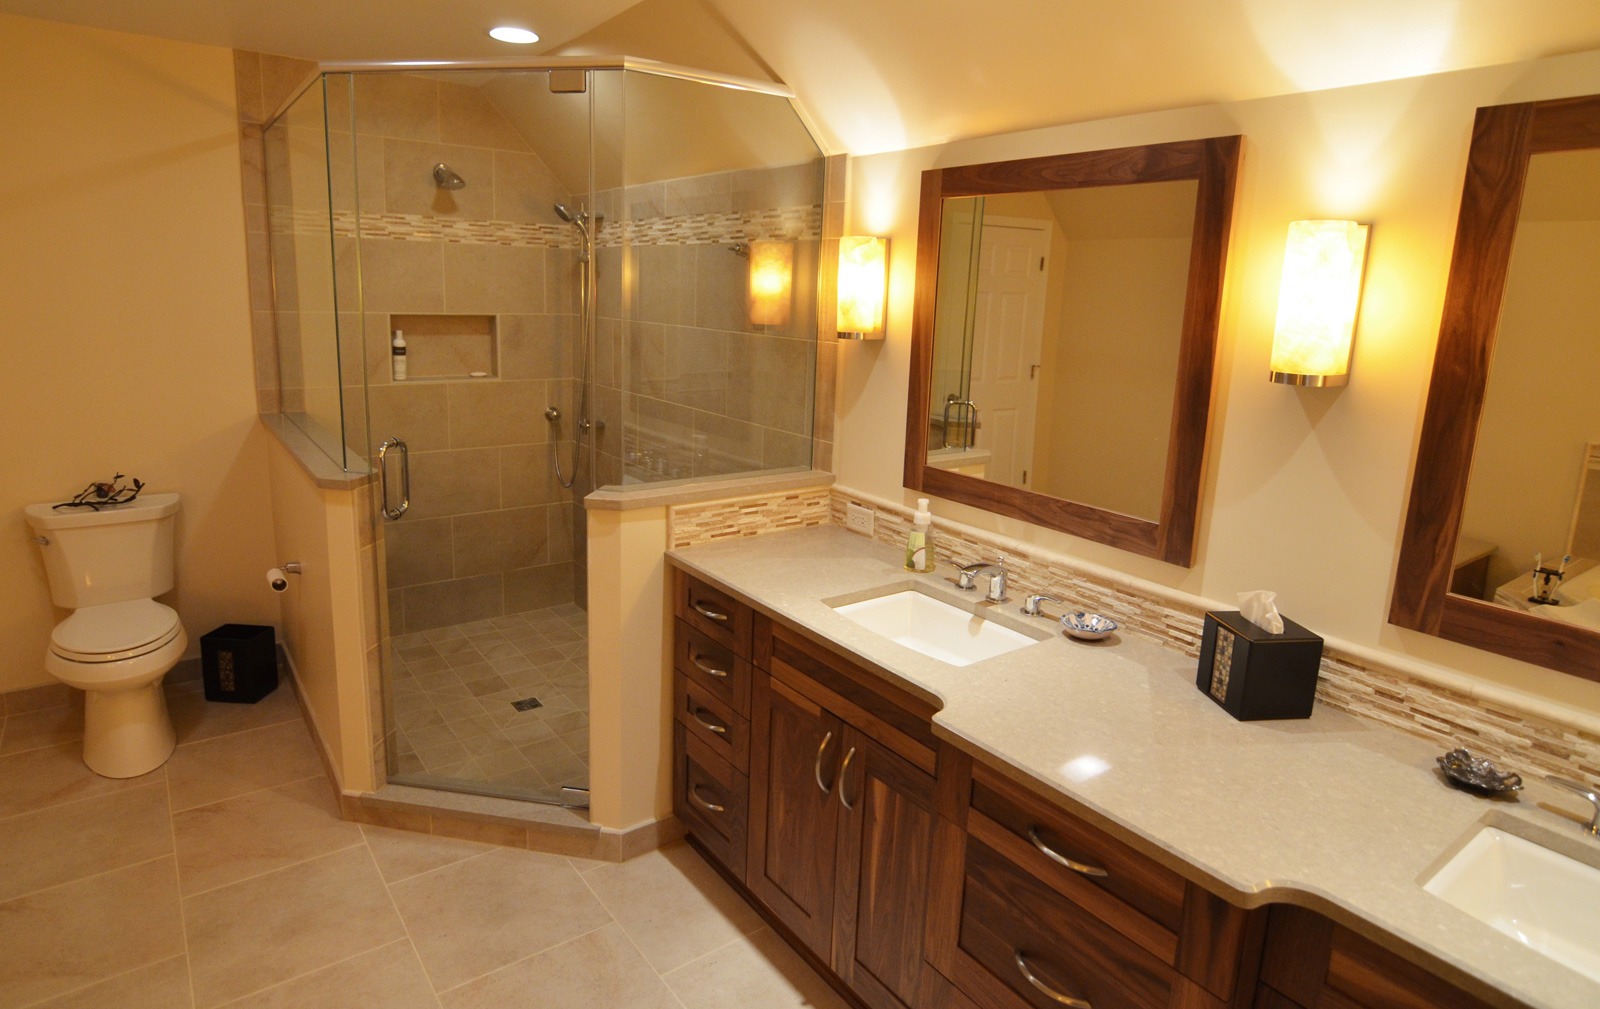 Bathroom remodeling in Naperville, IL. A custom shower with an angled door for expanded space.